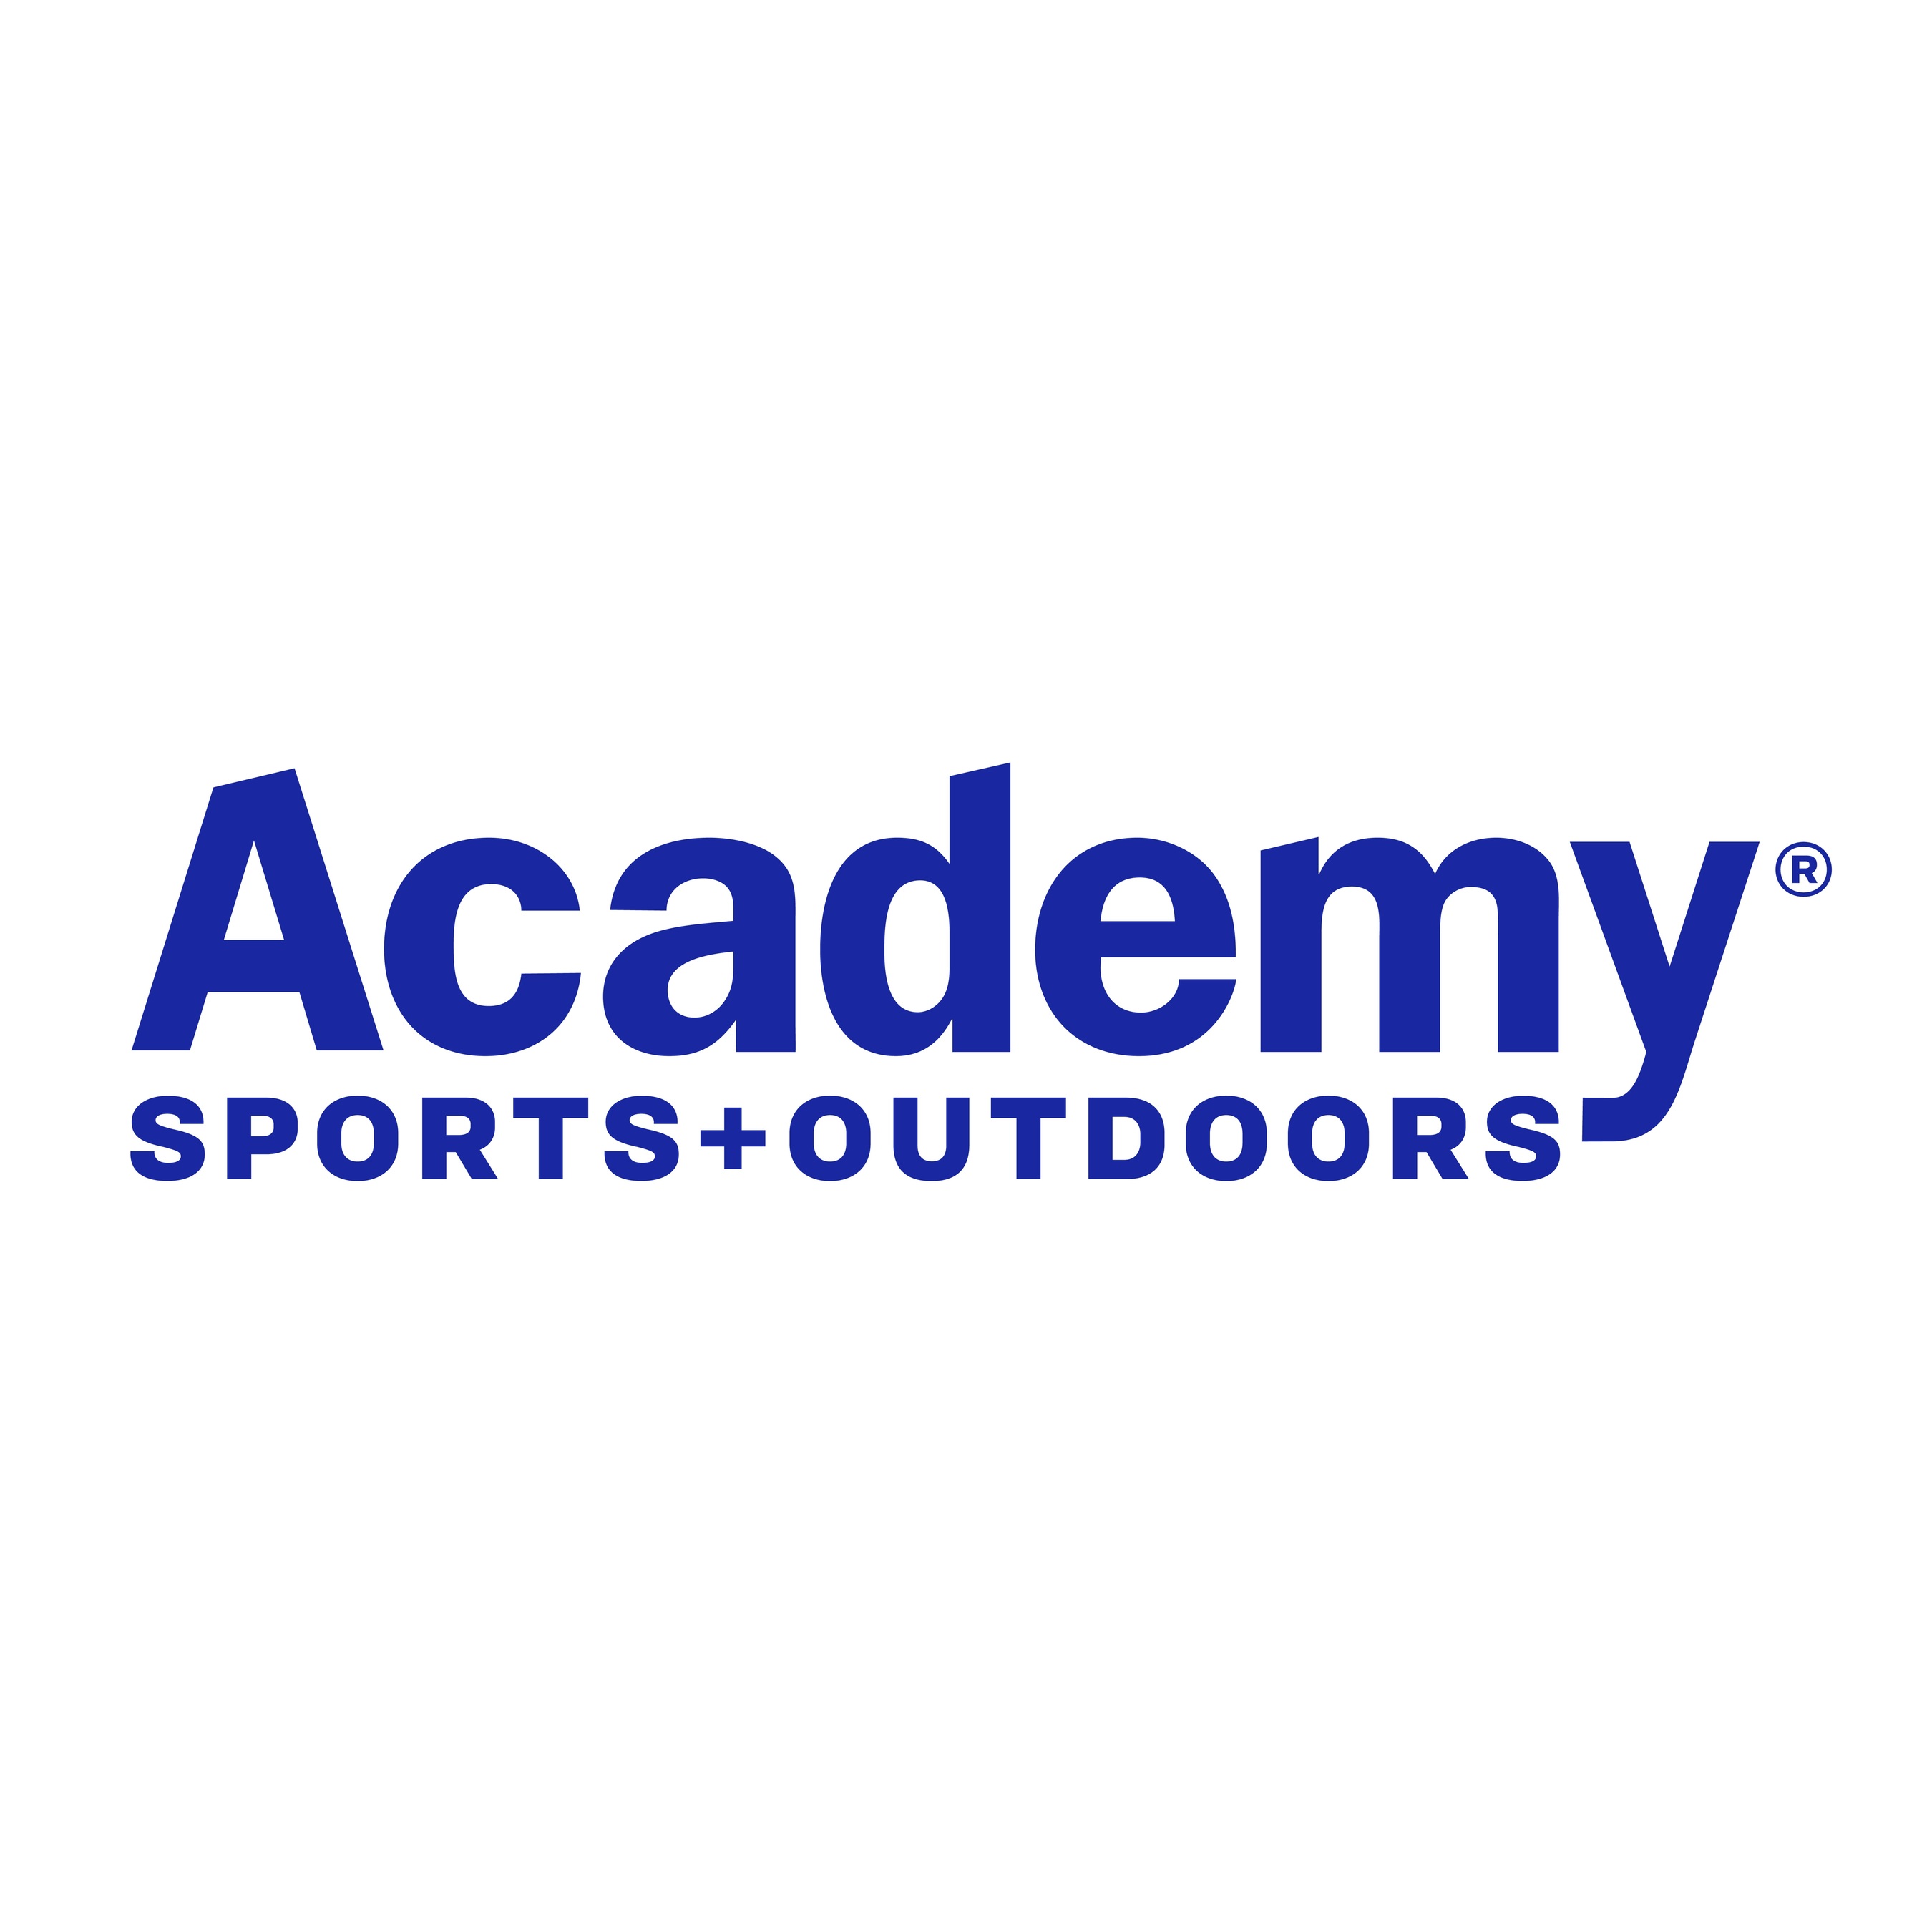 Academy Sports and Outdoors has closed showroom for third time